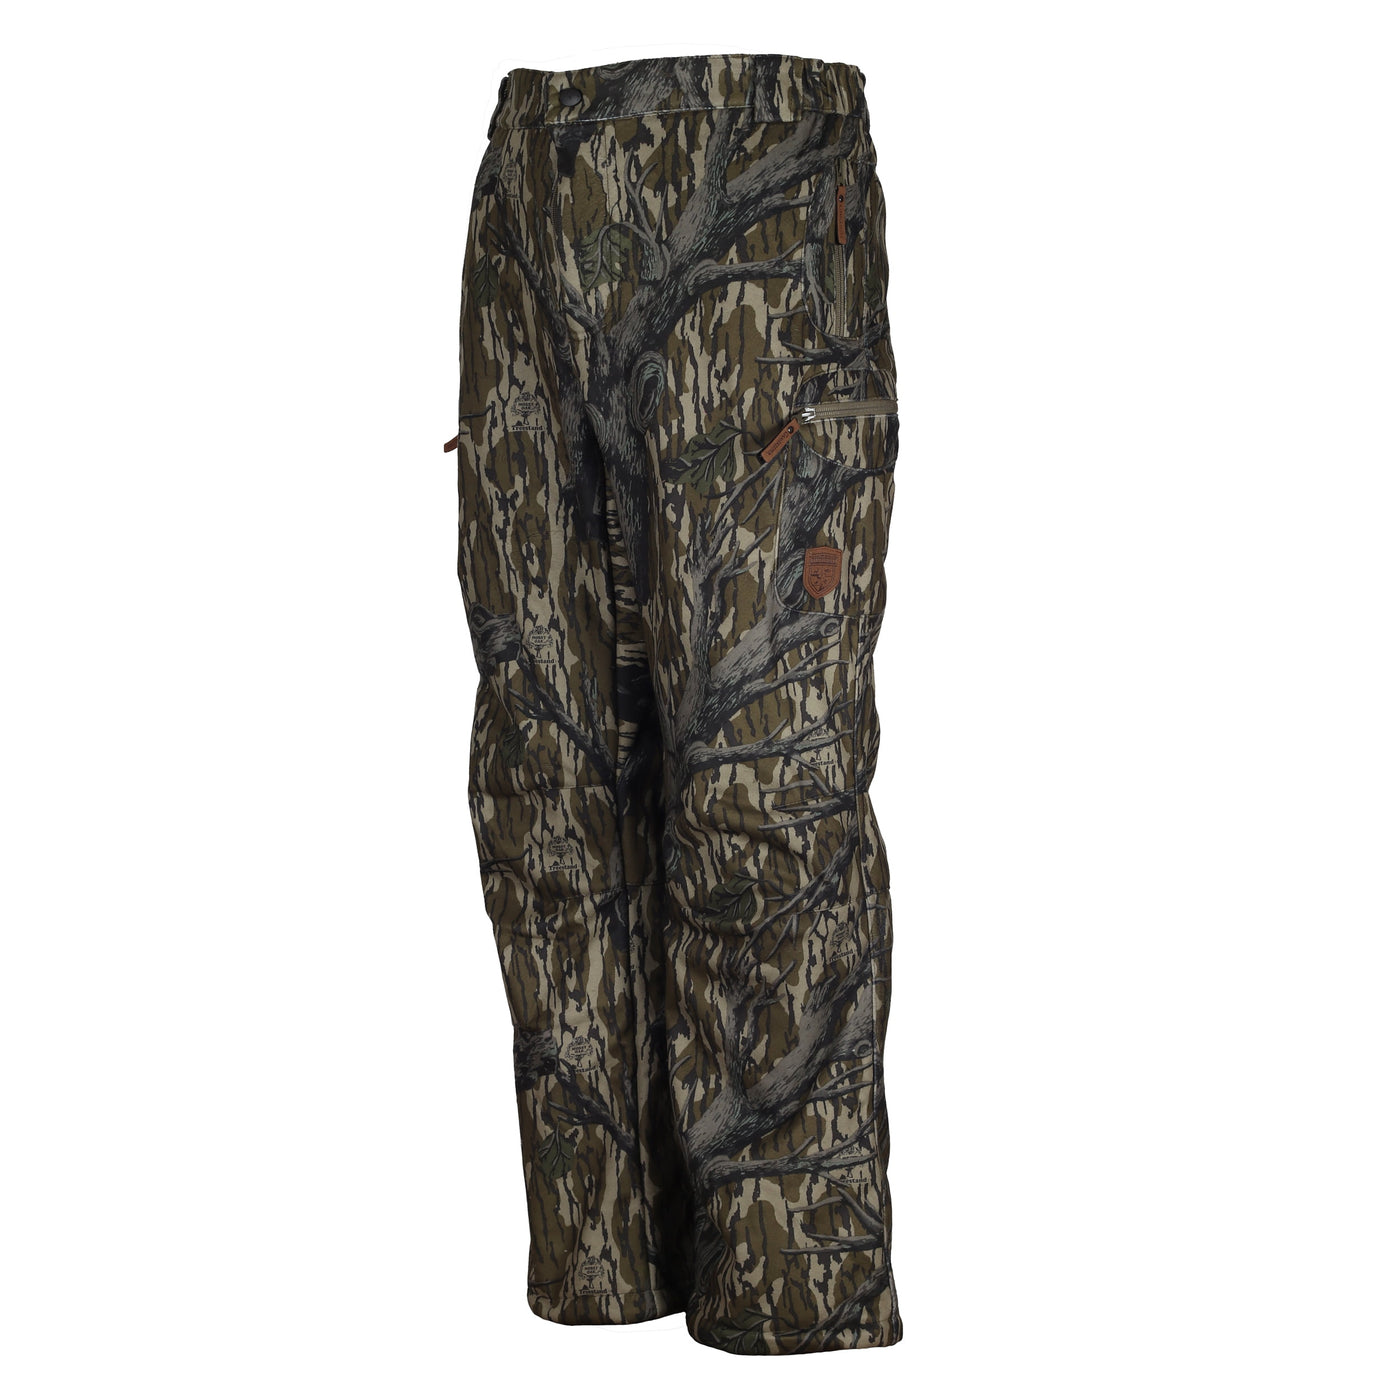 Gamekeeper Harvester Pant-CAMO CLOTHING-Tree Stand-2XL-Kevin's Fine Outdoor Gear & Apparel